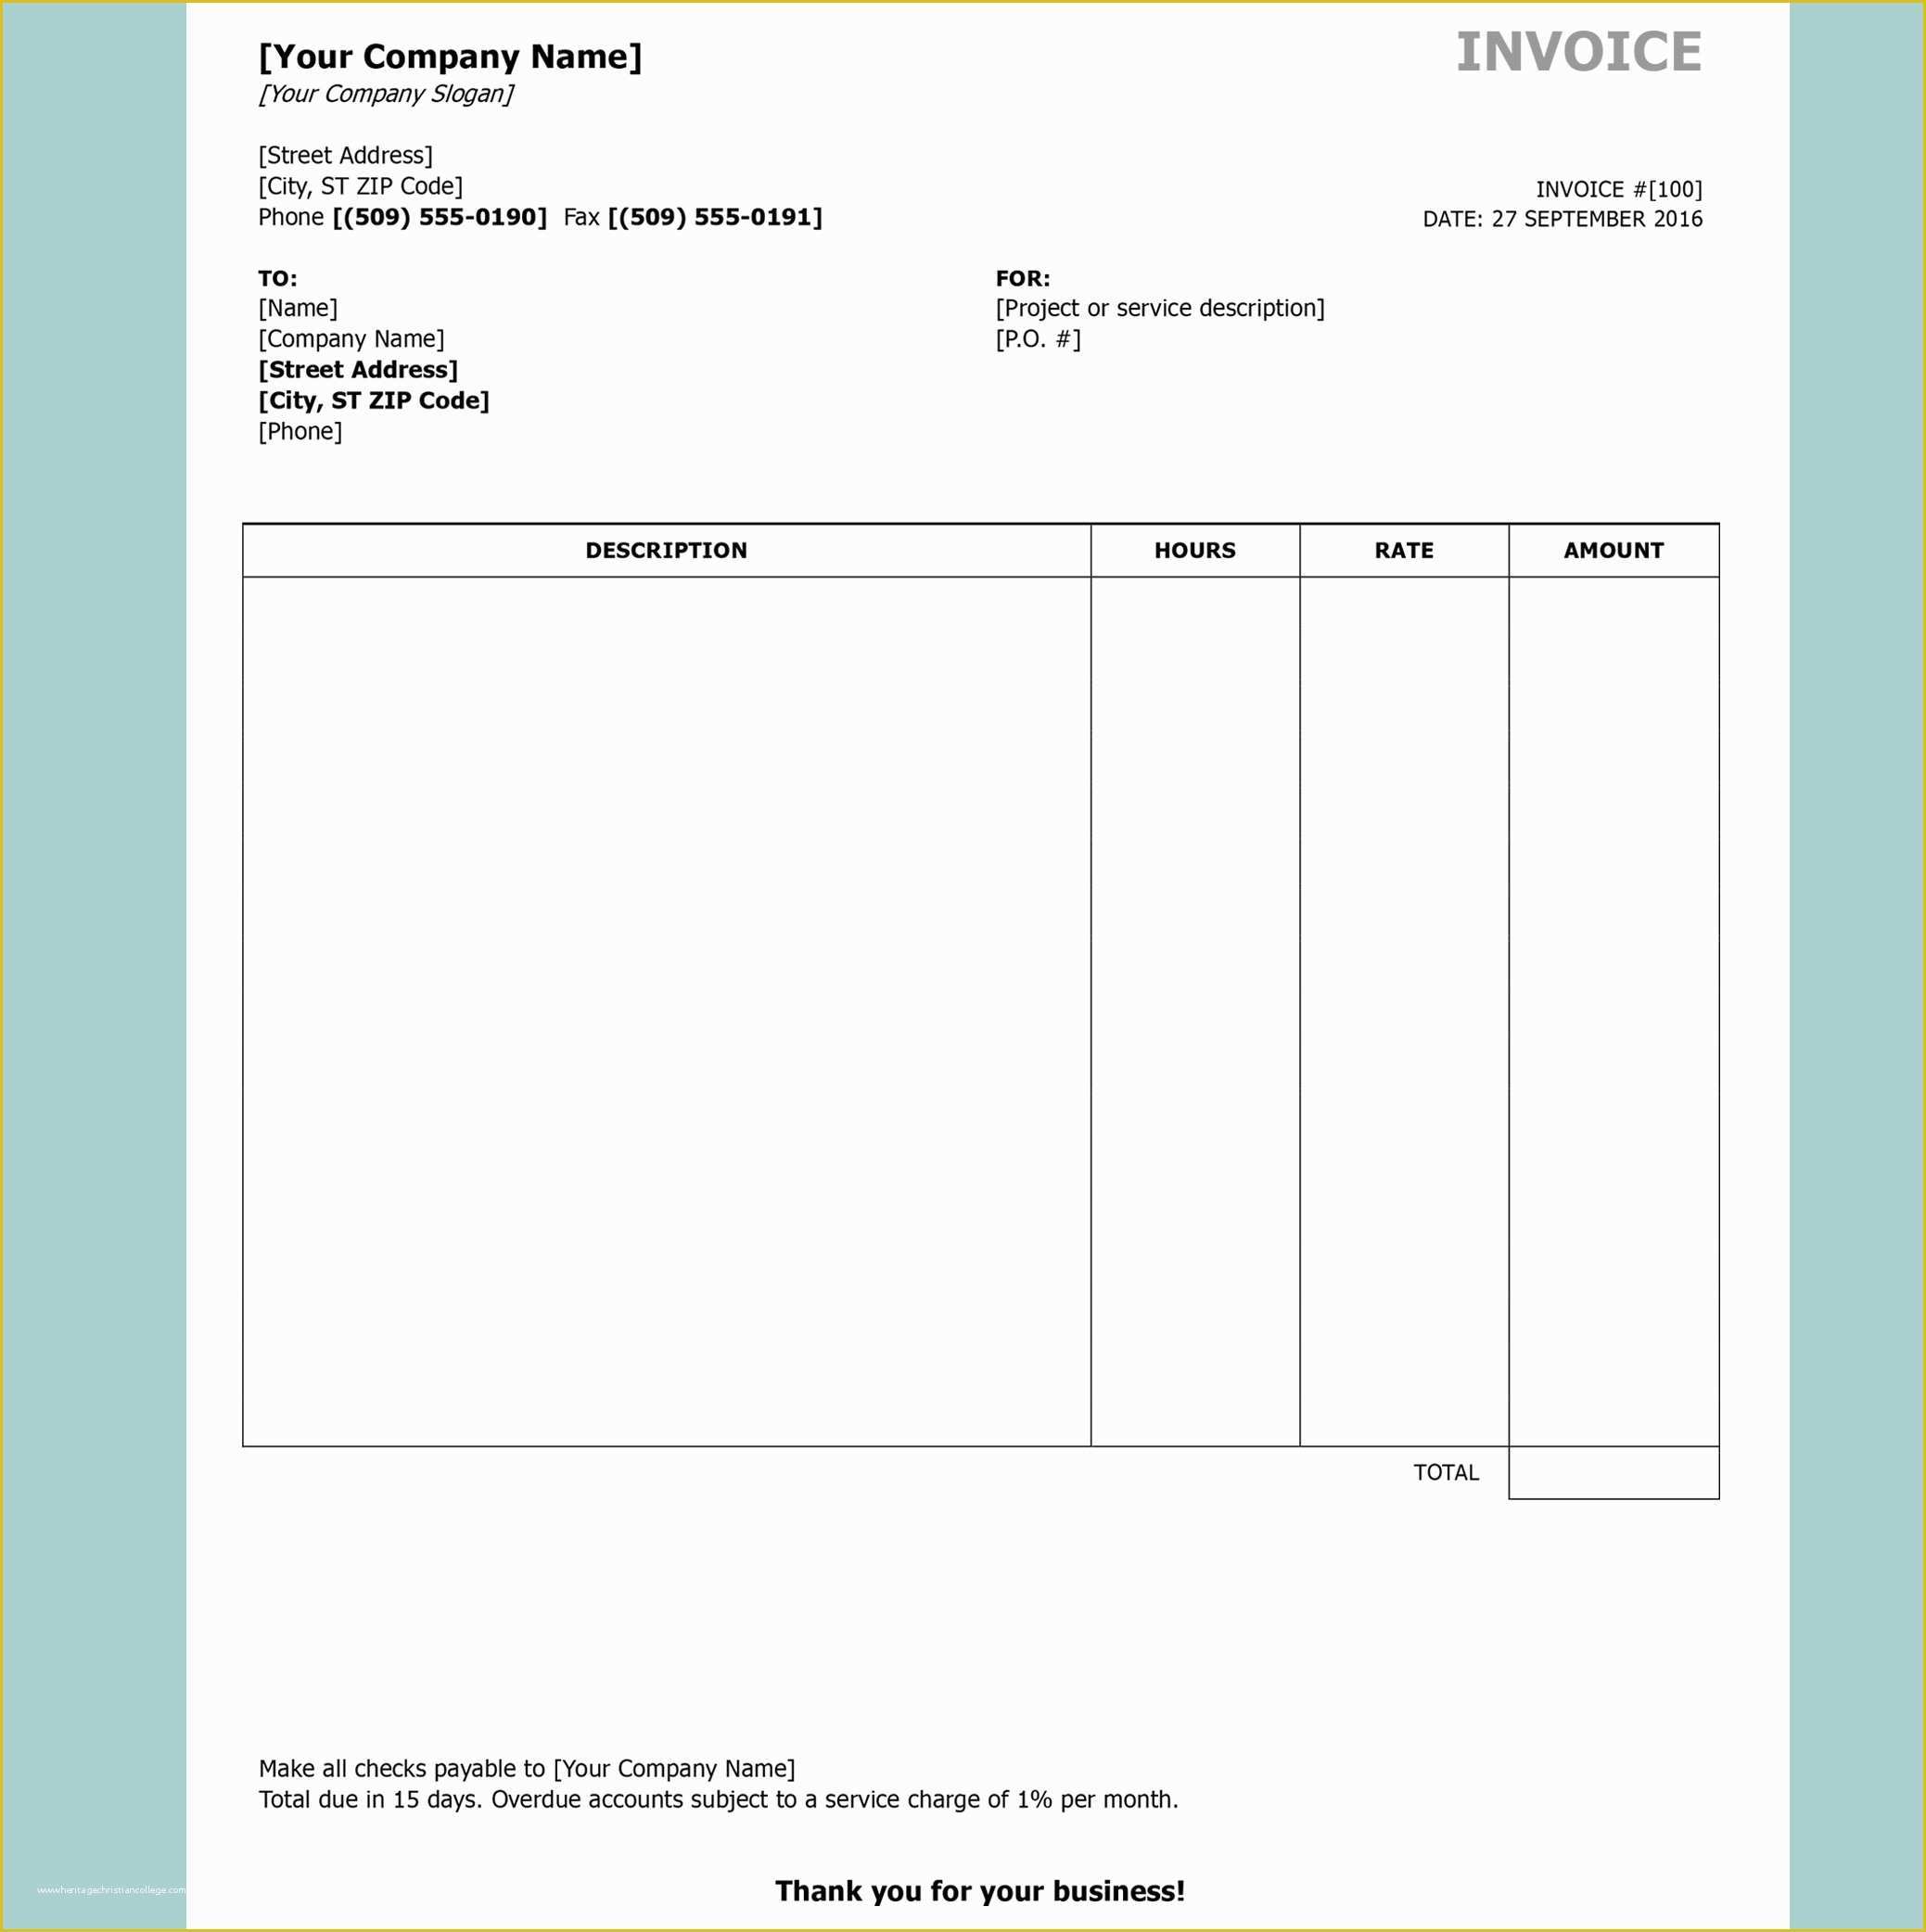 Invoice Template Excel Download Free Of Free Invoice Templates by Invoiceberry the Grid System